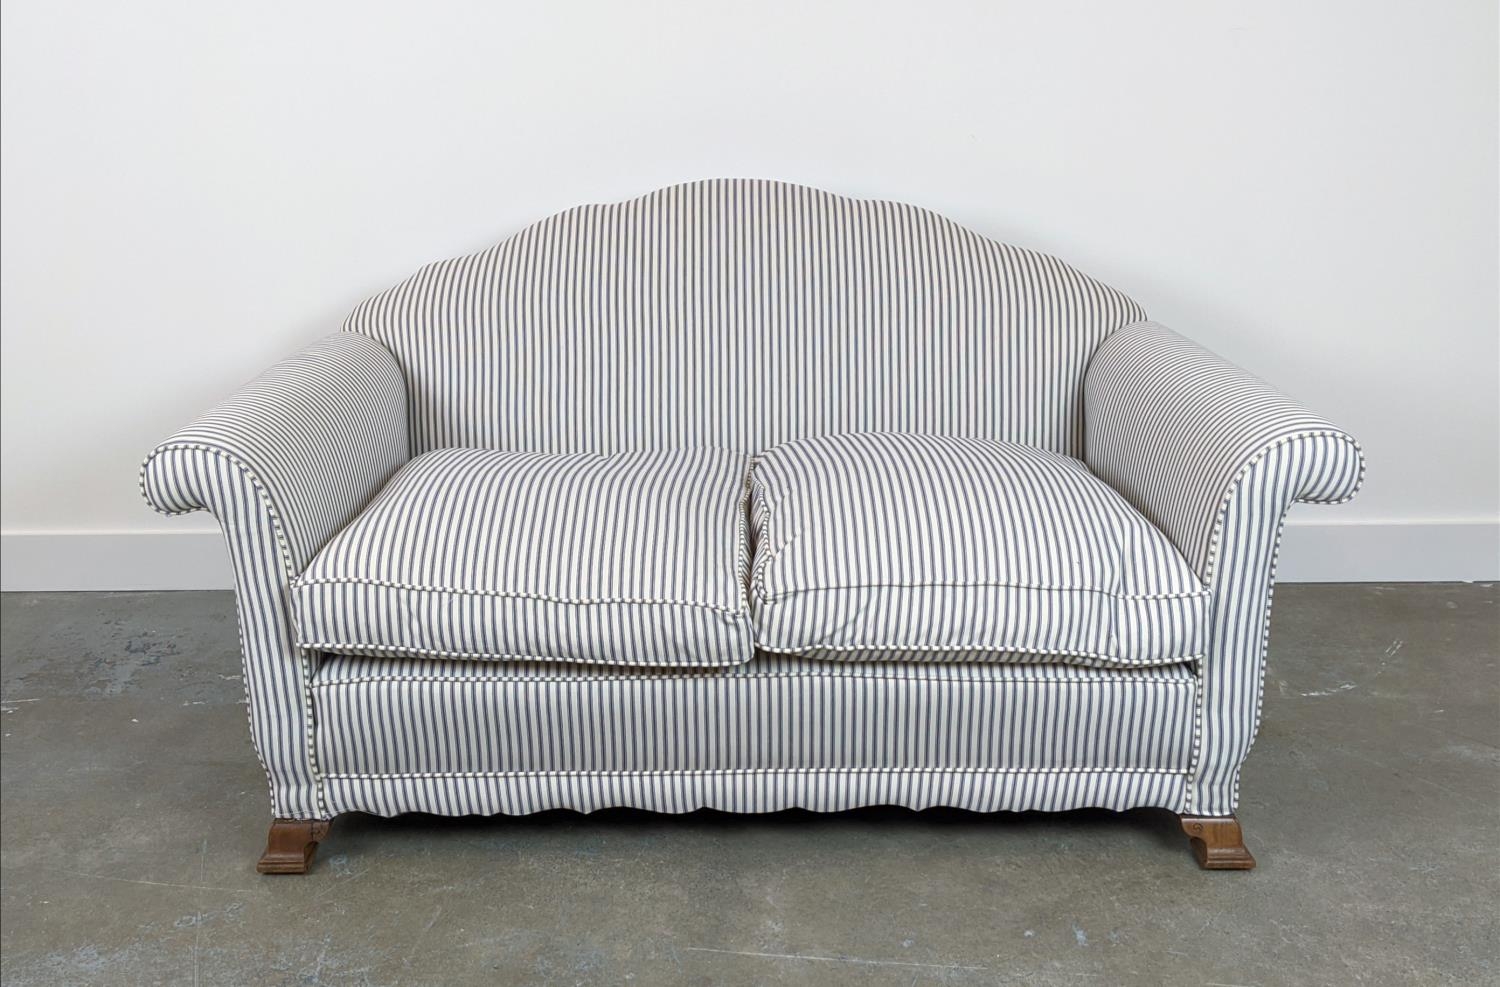 SOFA, early 20th century walnut in new ticking upholstery, 80cm H x 154cm.